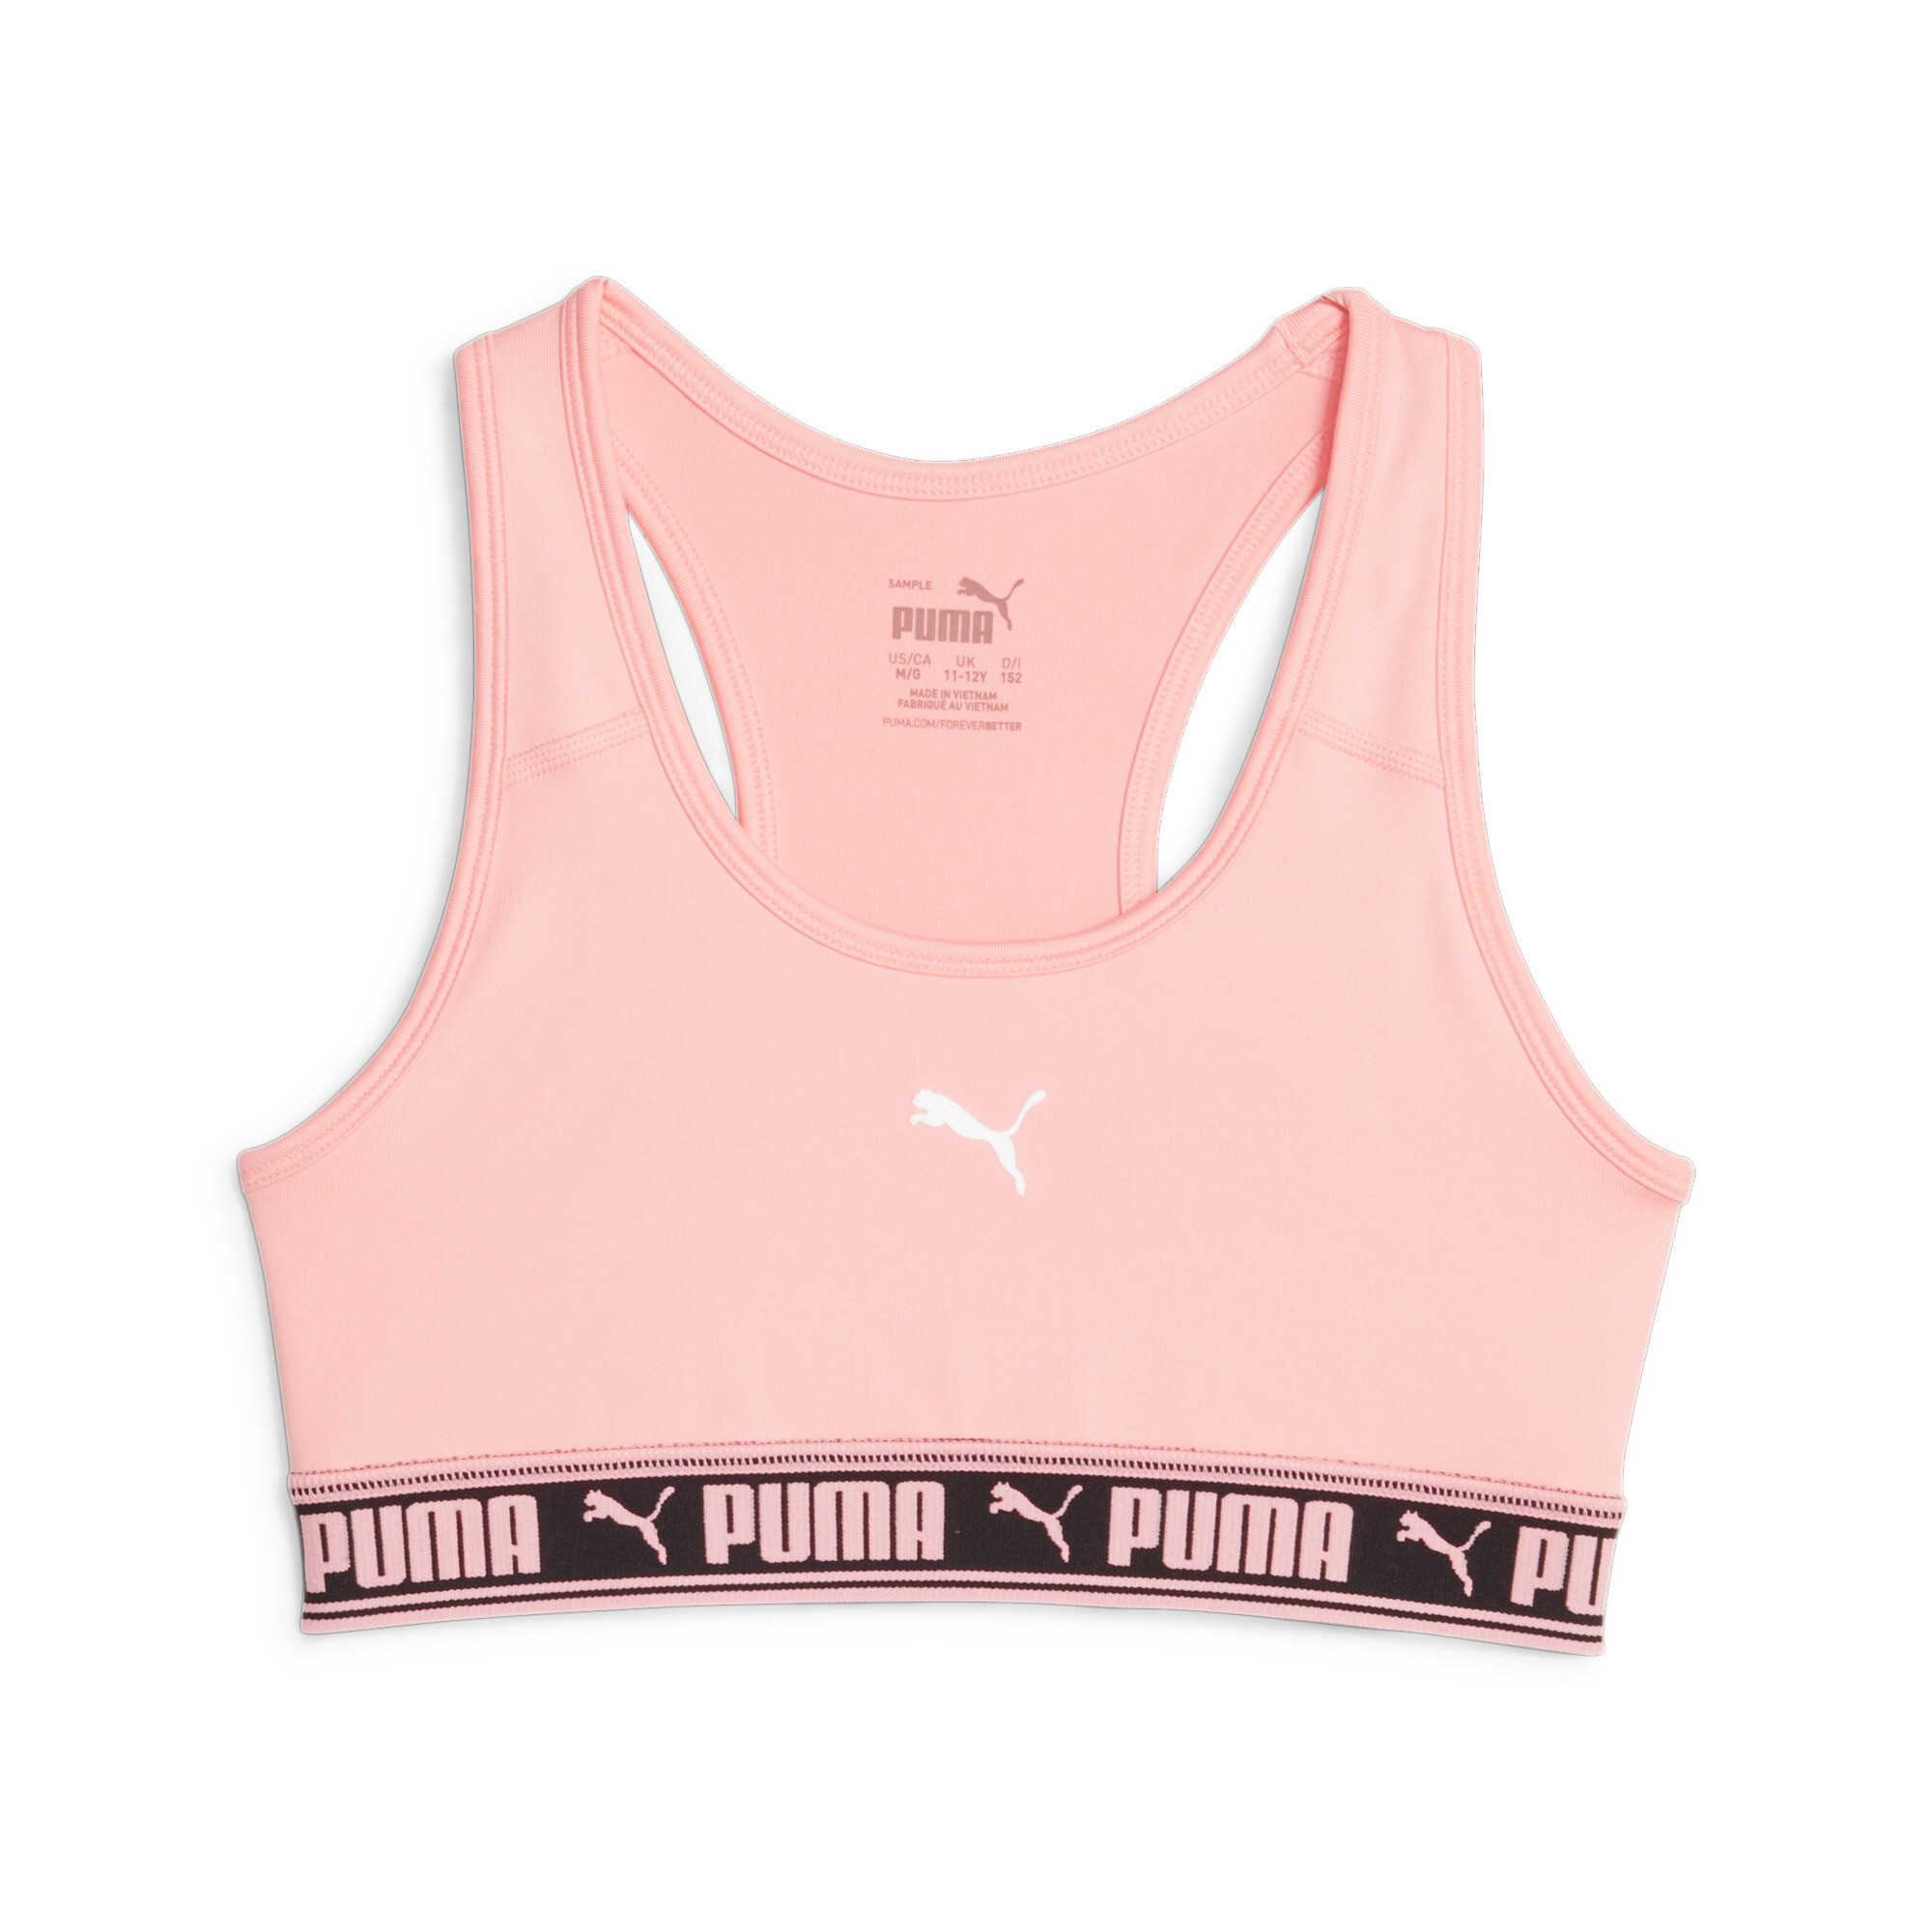 Women's Puma Strong Bra Youth, Pink, Size 9-10Y, Clothing